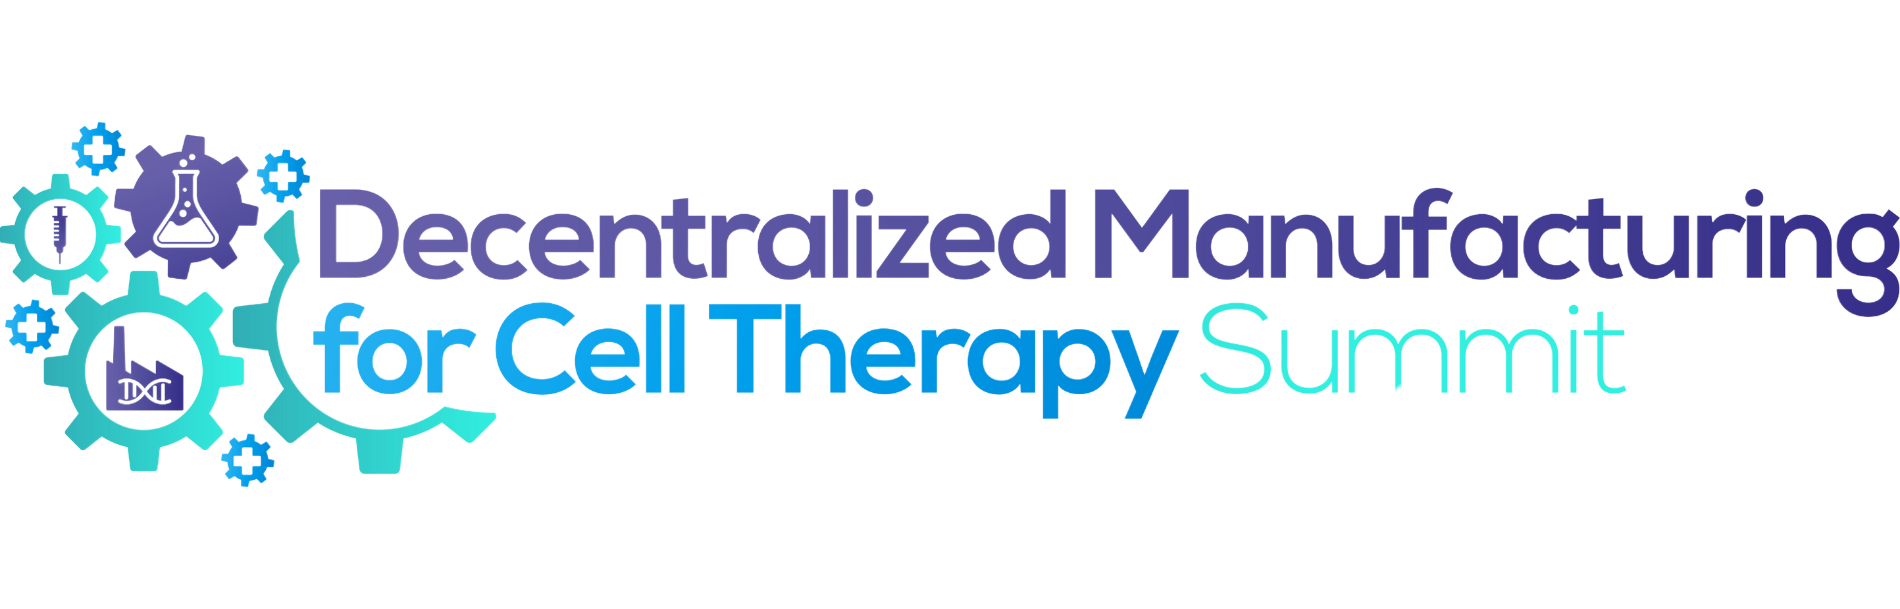 Decentralized Manufacturing for Cell Therapy Summit